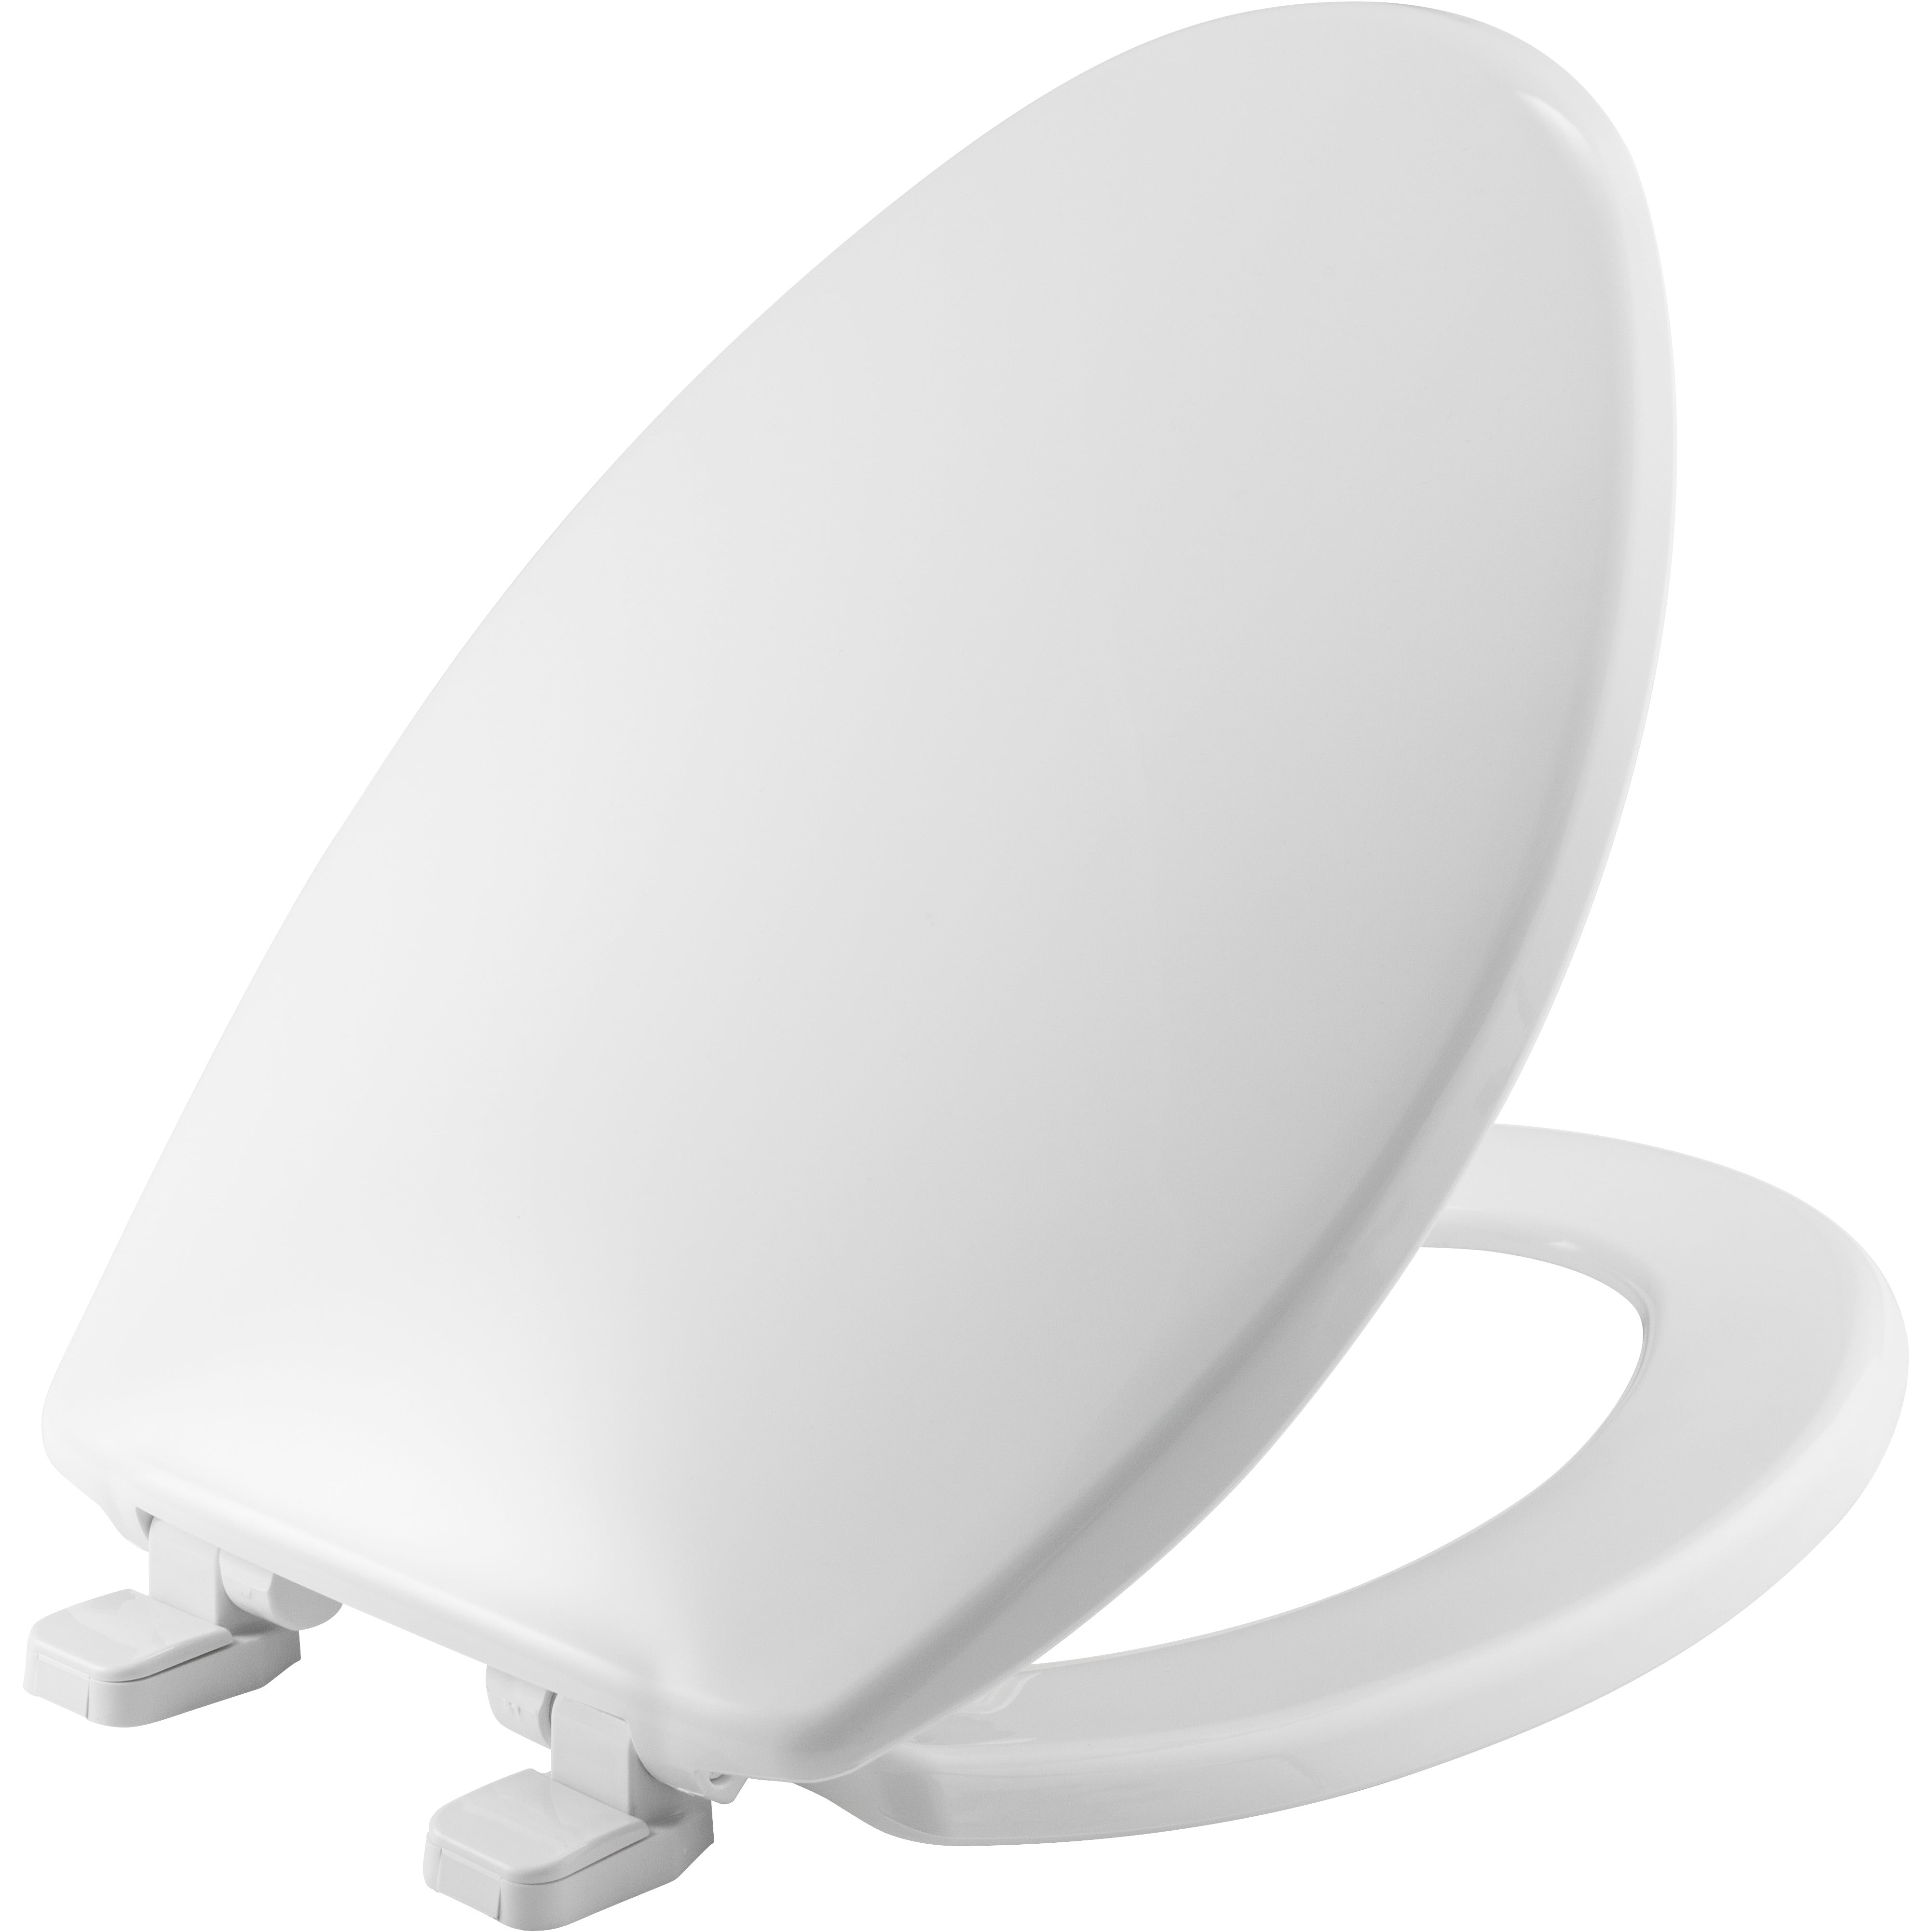 Mayfair Elongated Wood Toilet Seat Featuring Slow-Close Molded Durable White 